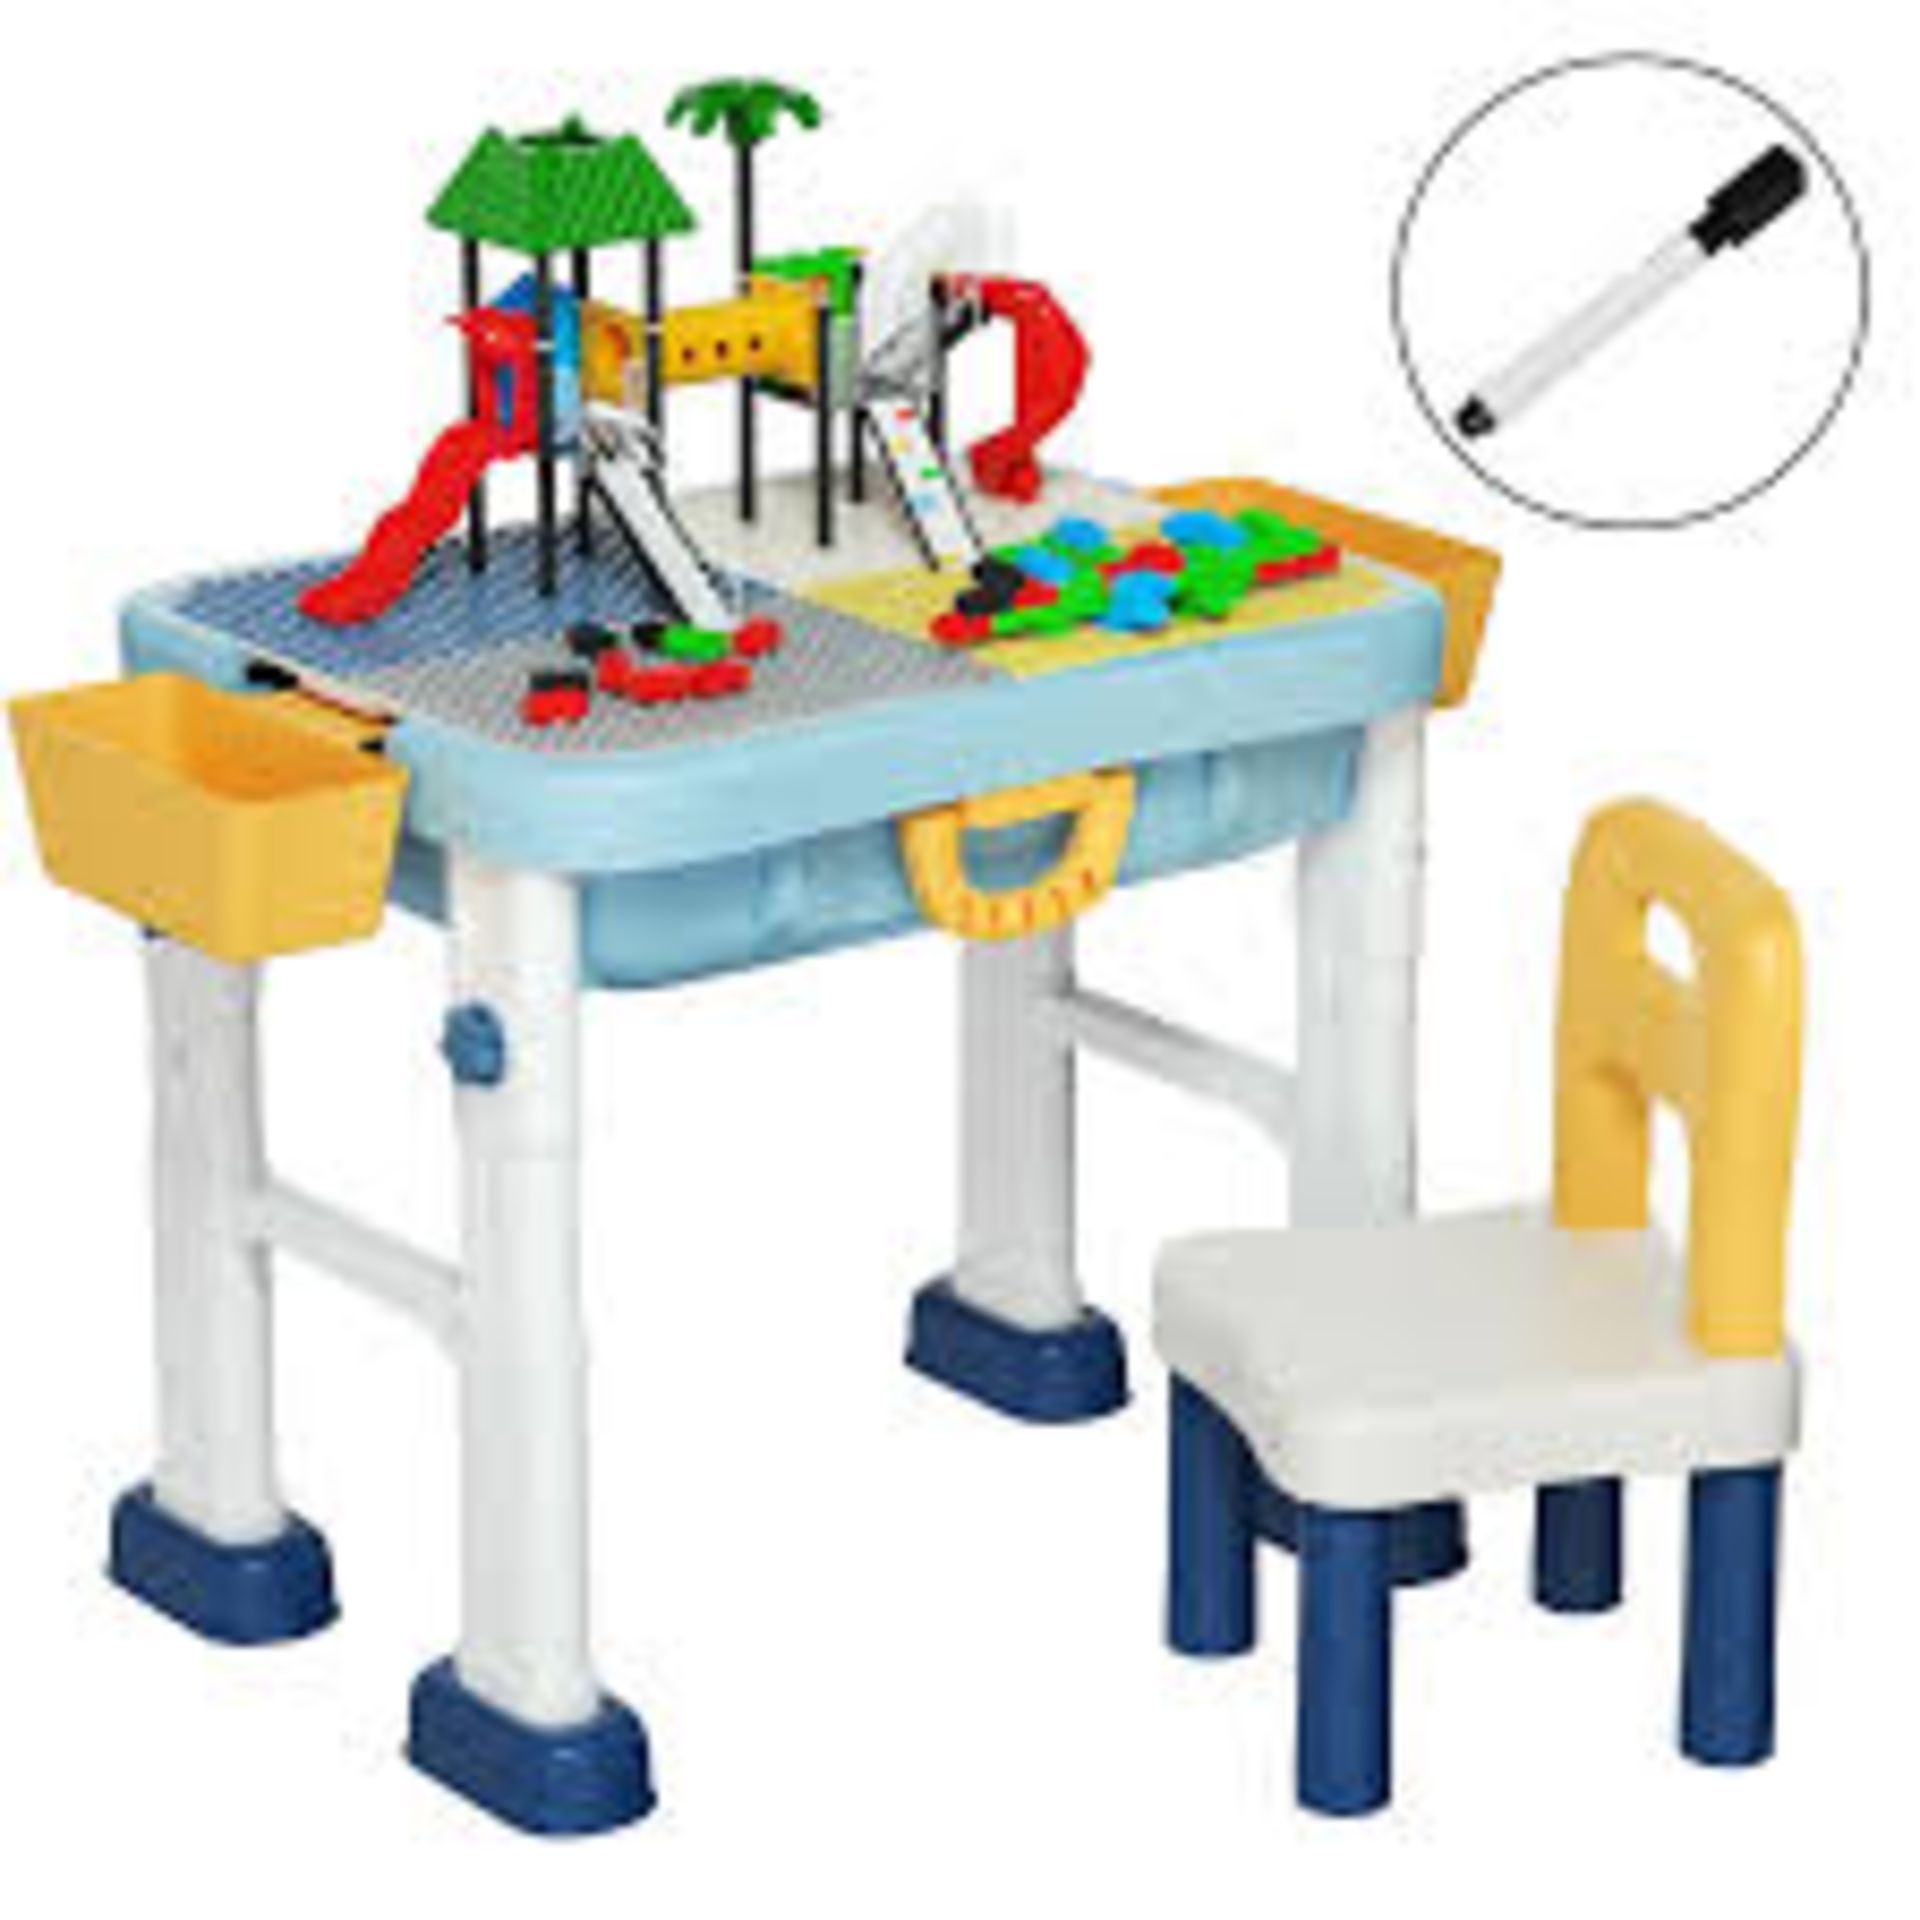 6-in-1 Kids Activity Table and Chair Set with Adjustable Heights. - R13a.13. This kid's play table